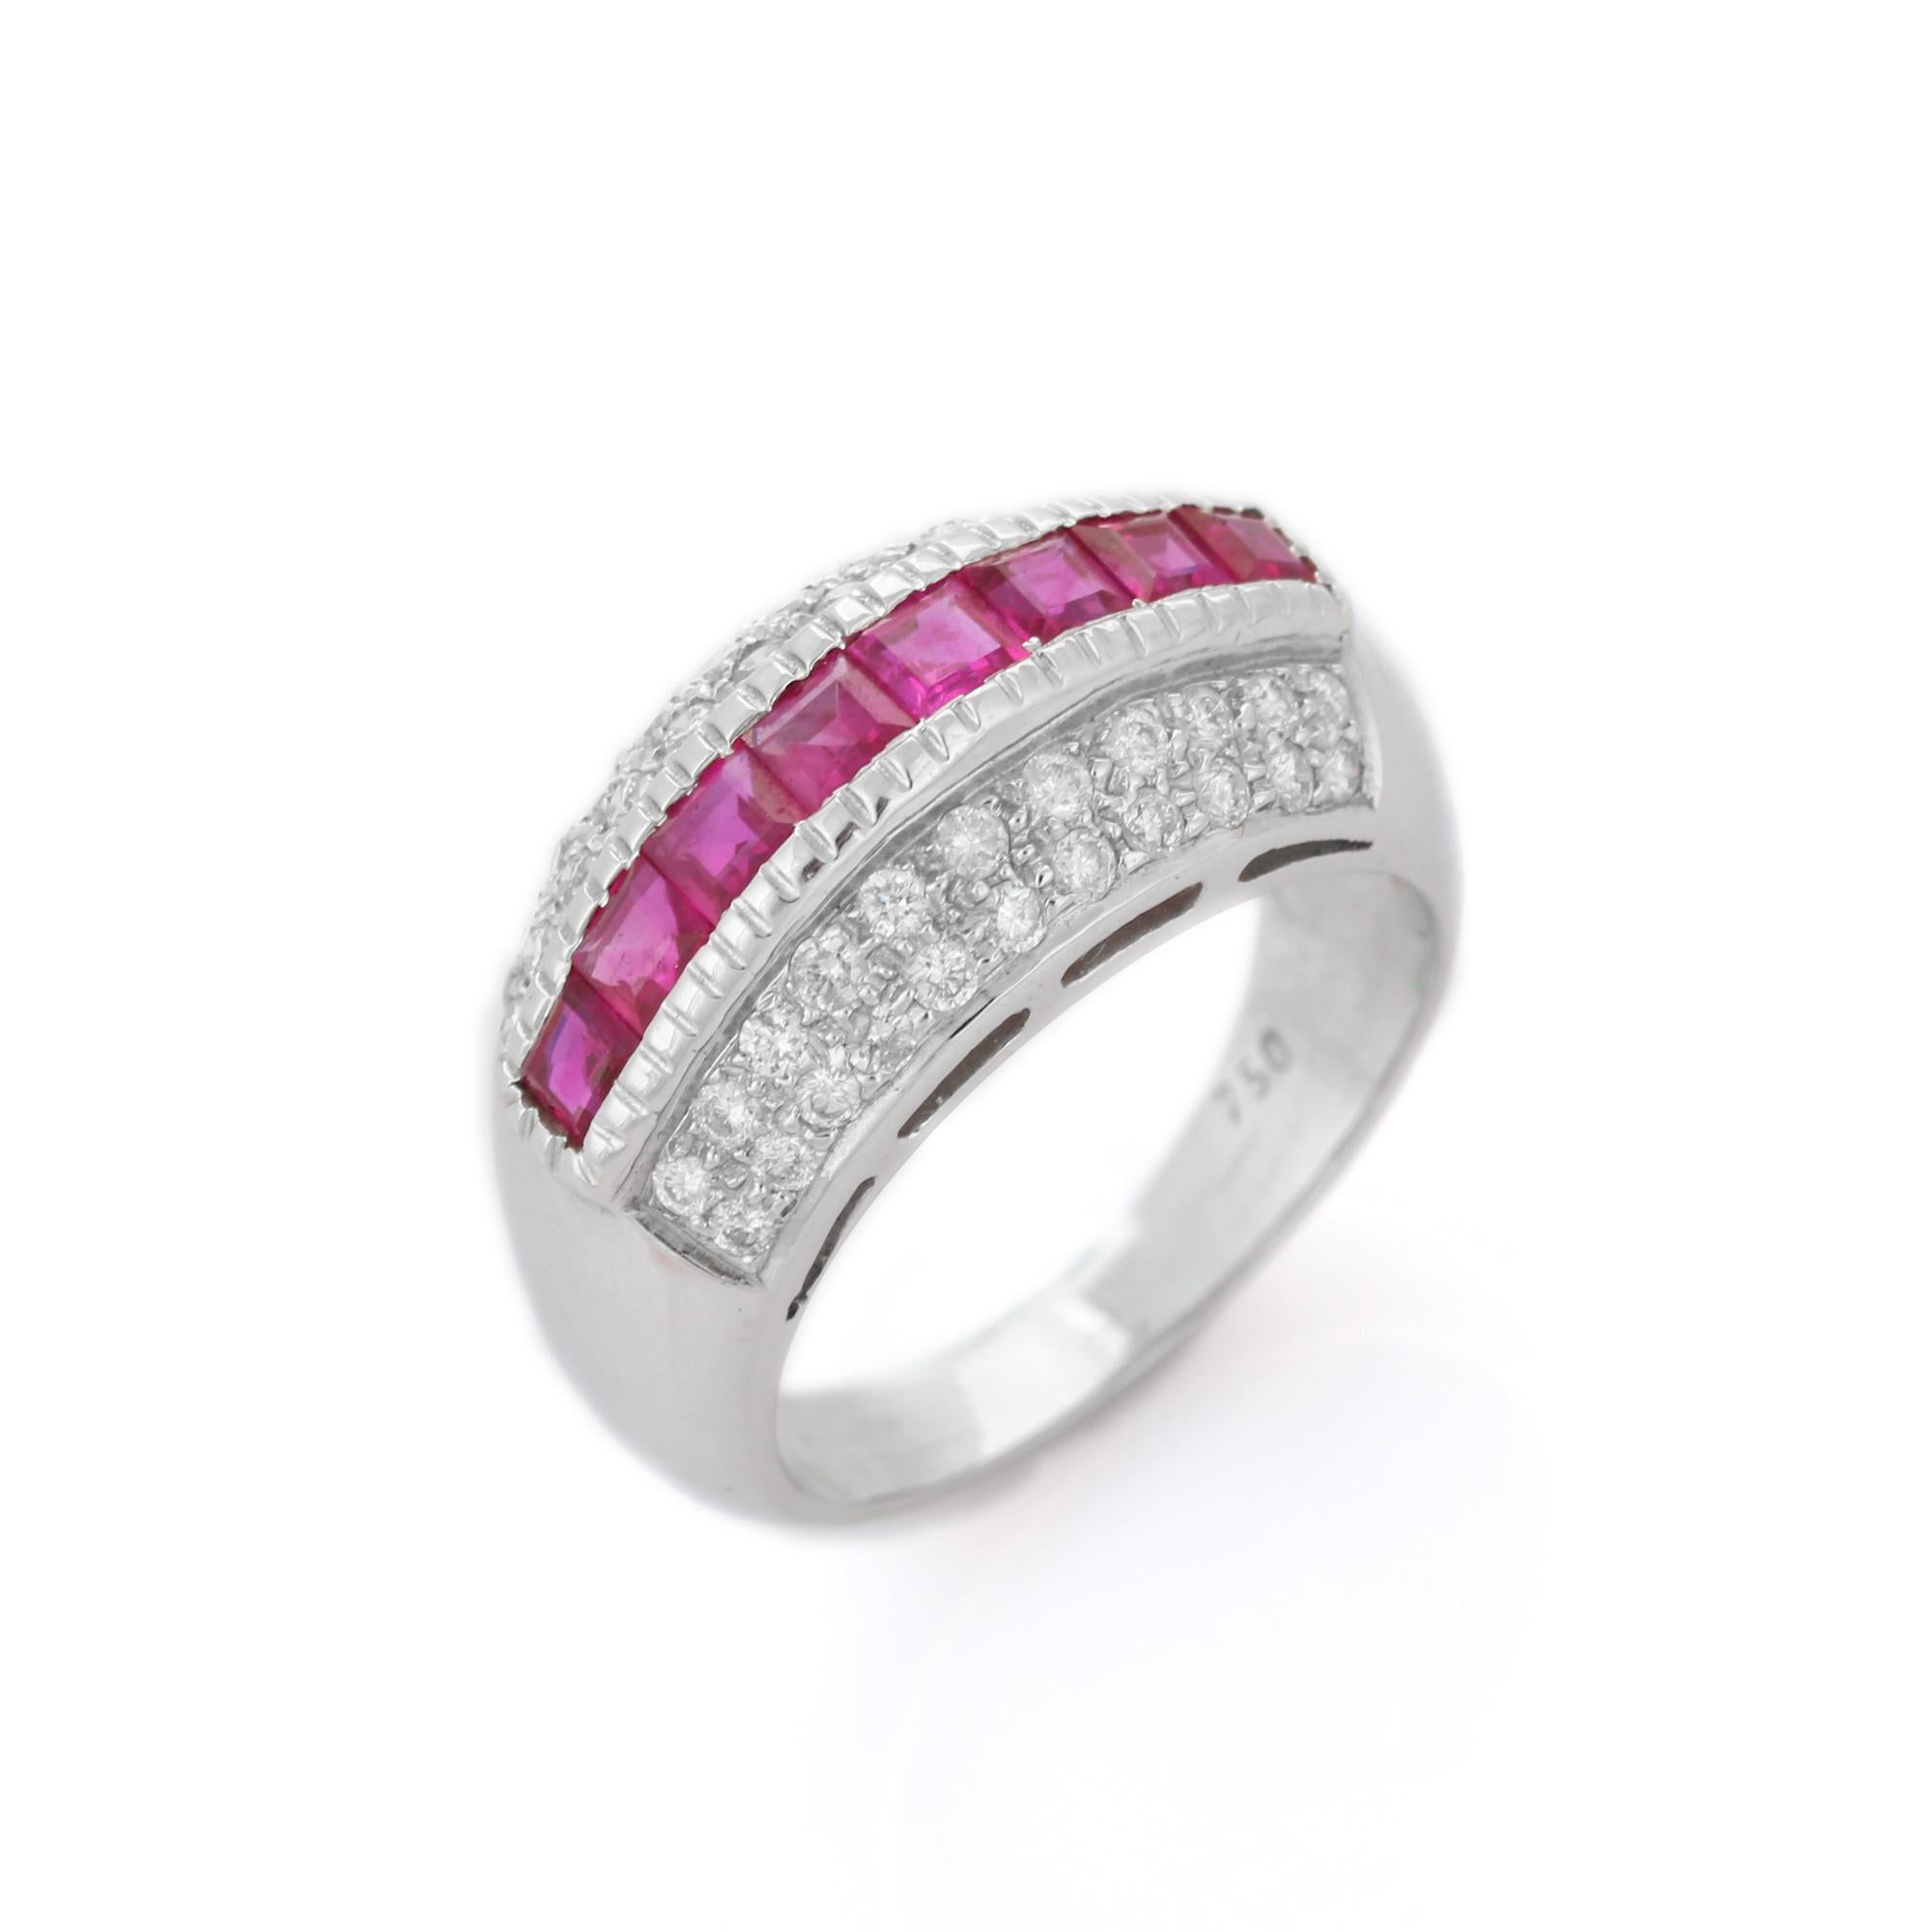 For Sale:  1.36 Ct Ruby Wedding Band Ring with Diamonds 18K White Gold Cocktail Ring 5